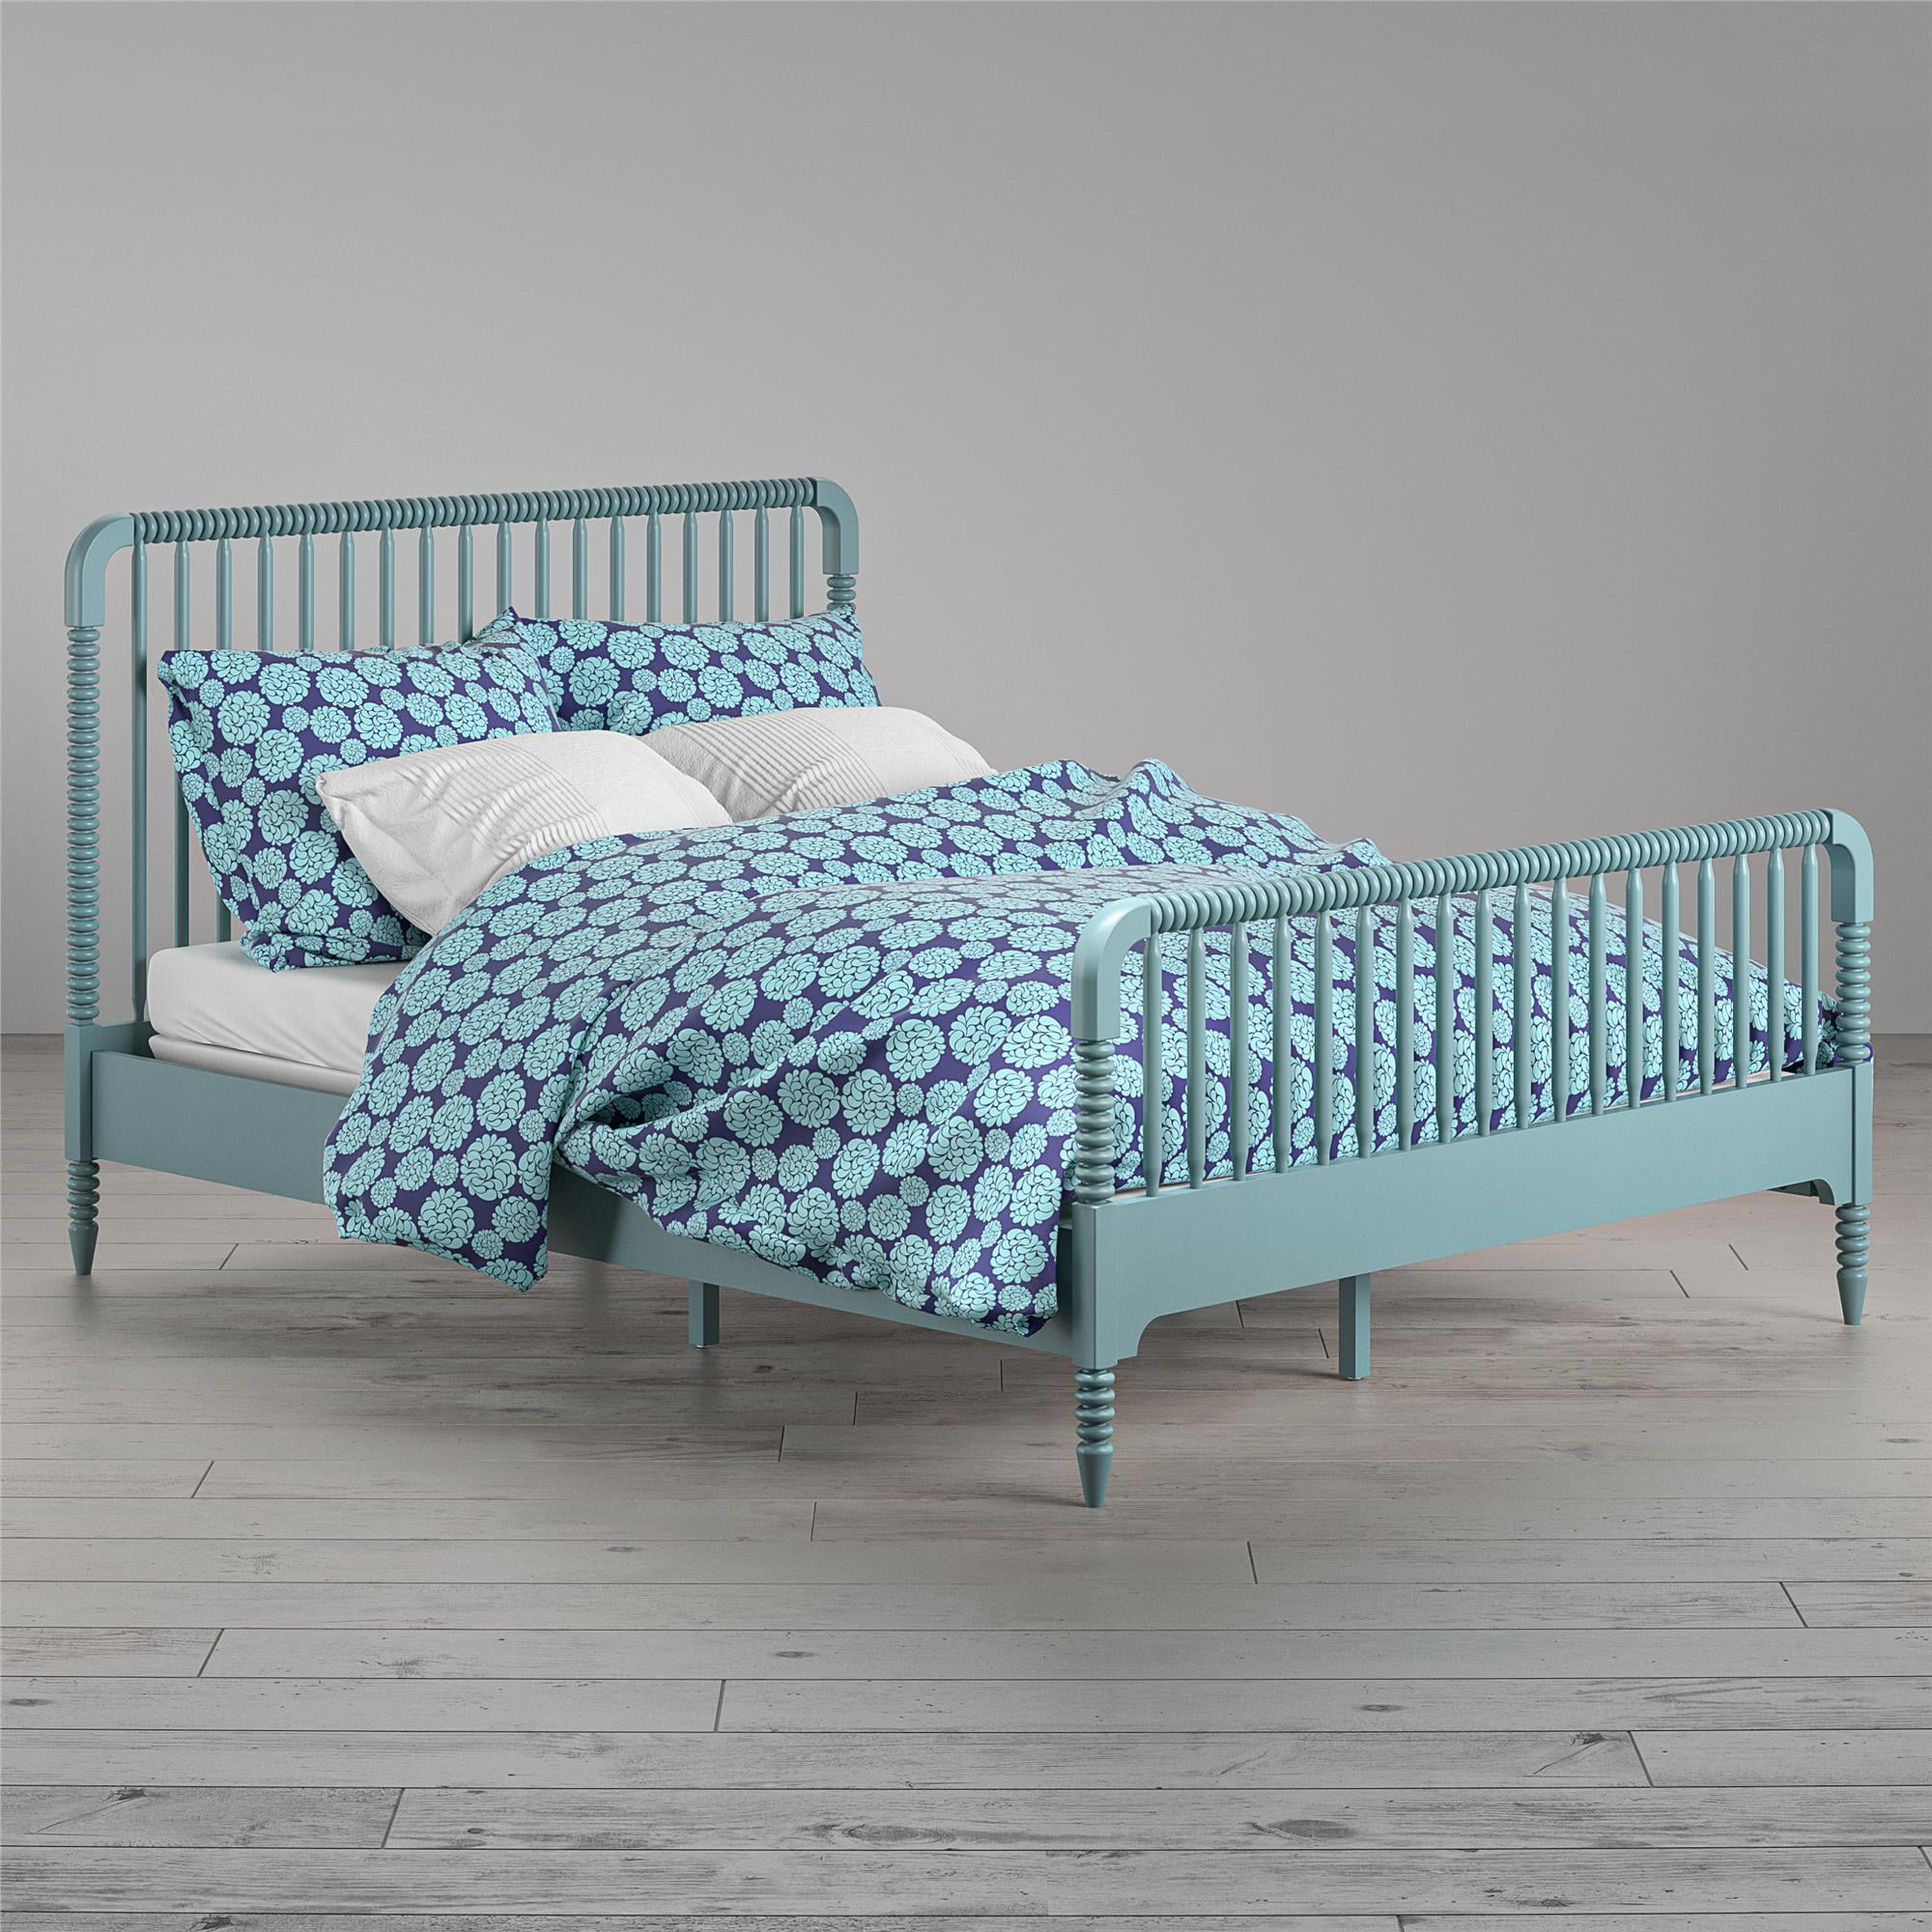 Ameriwood Home Little Seeds Monarch Metal Toddler Bed Gray